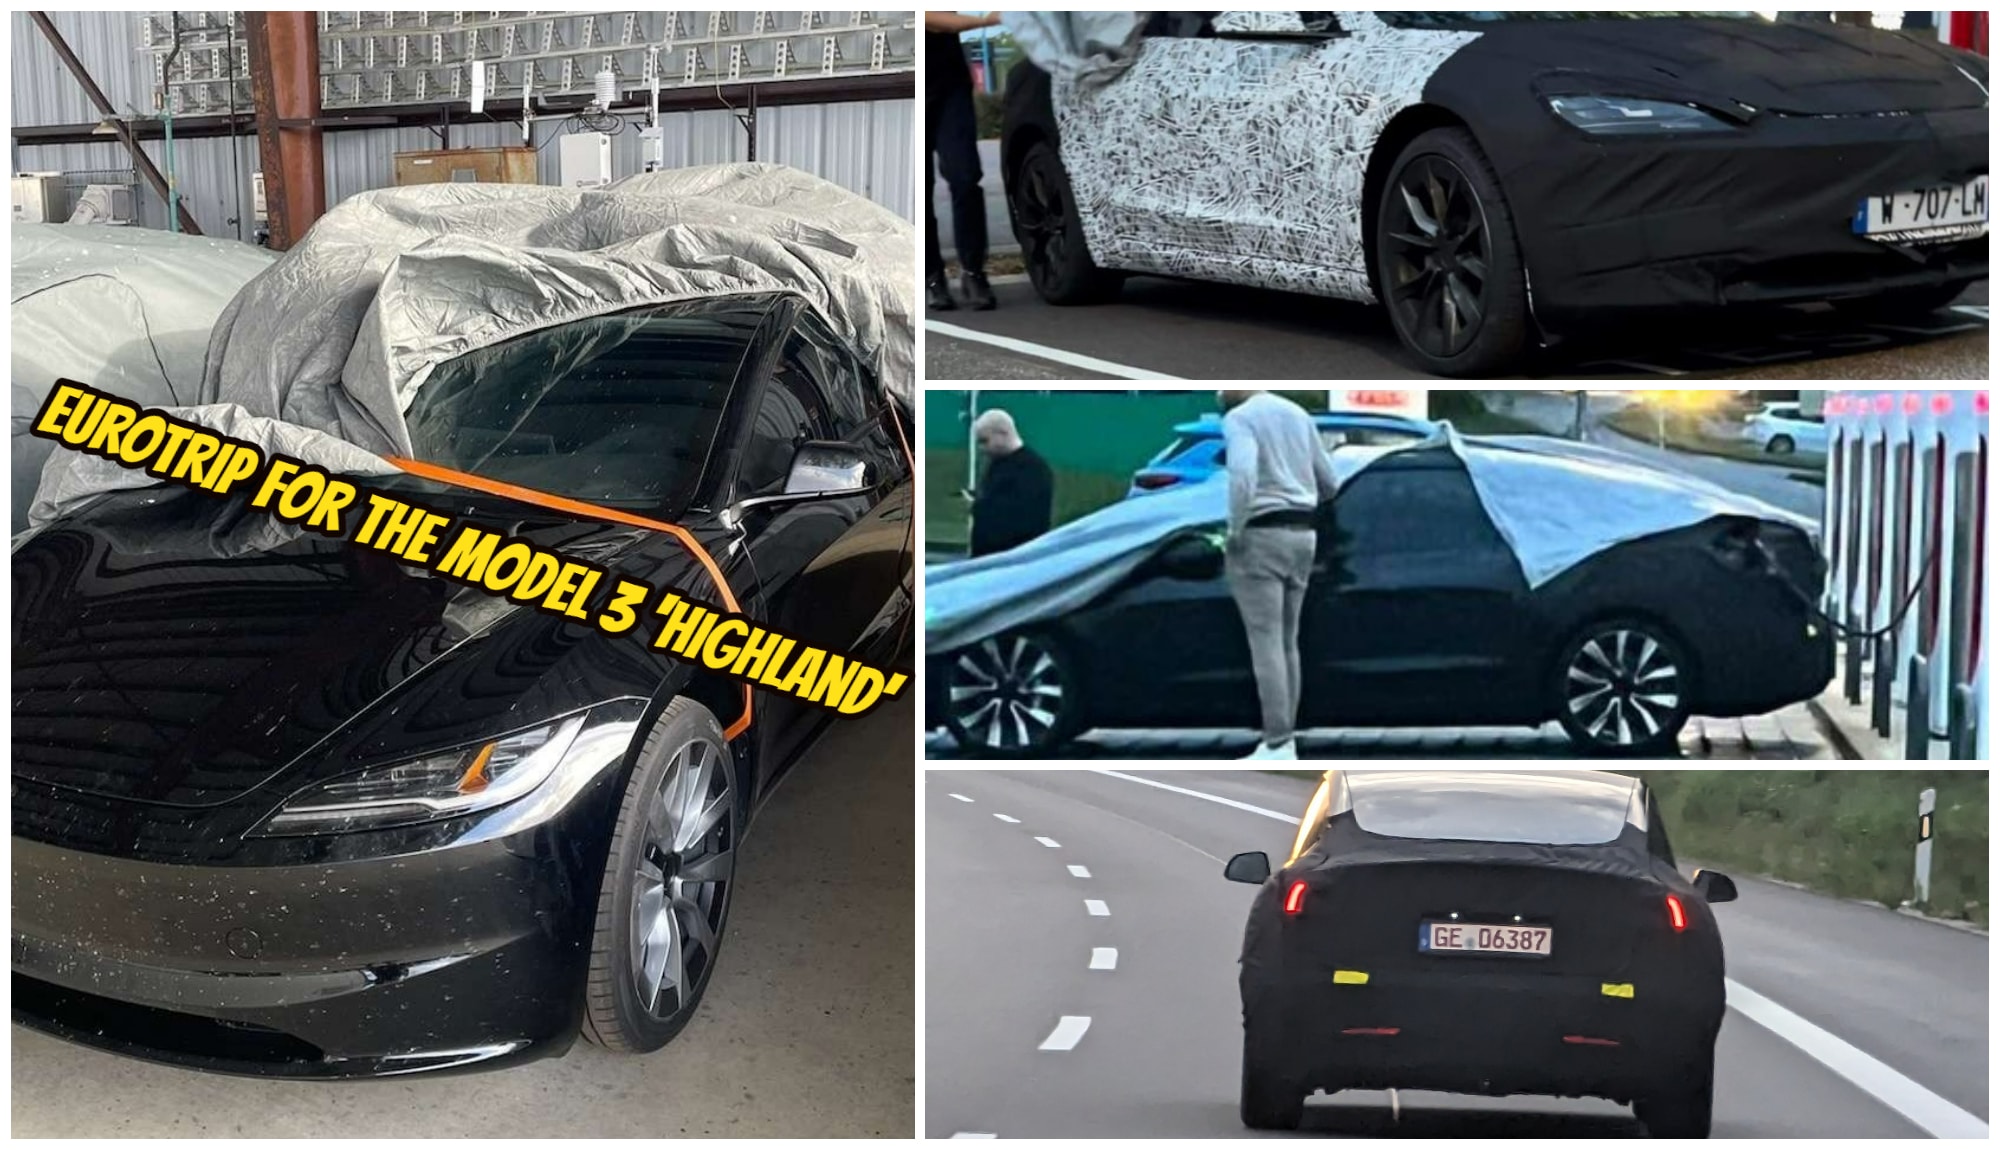 Tesla Model 3 Highland Spotted Uncovered In The US For The First Time